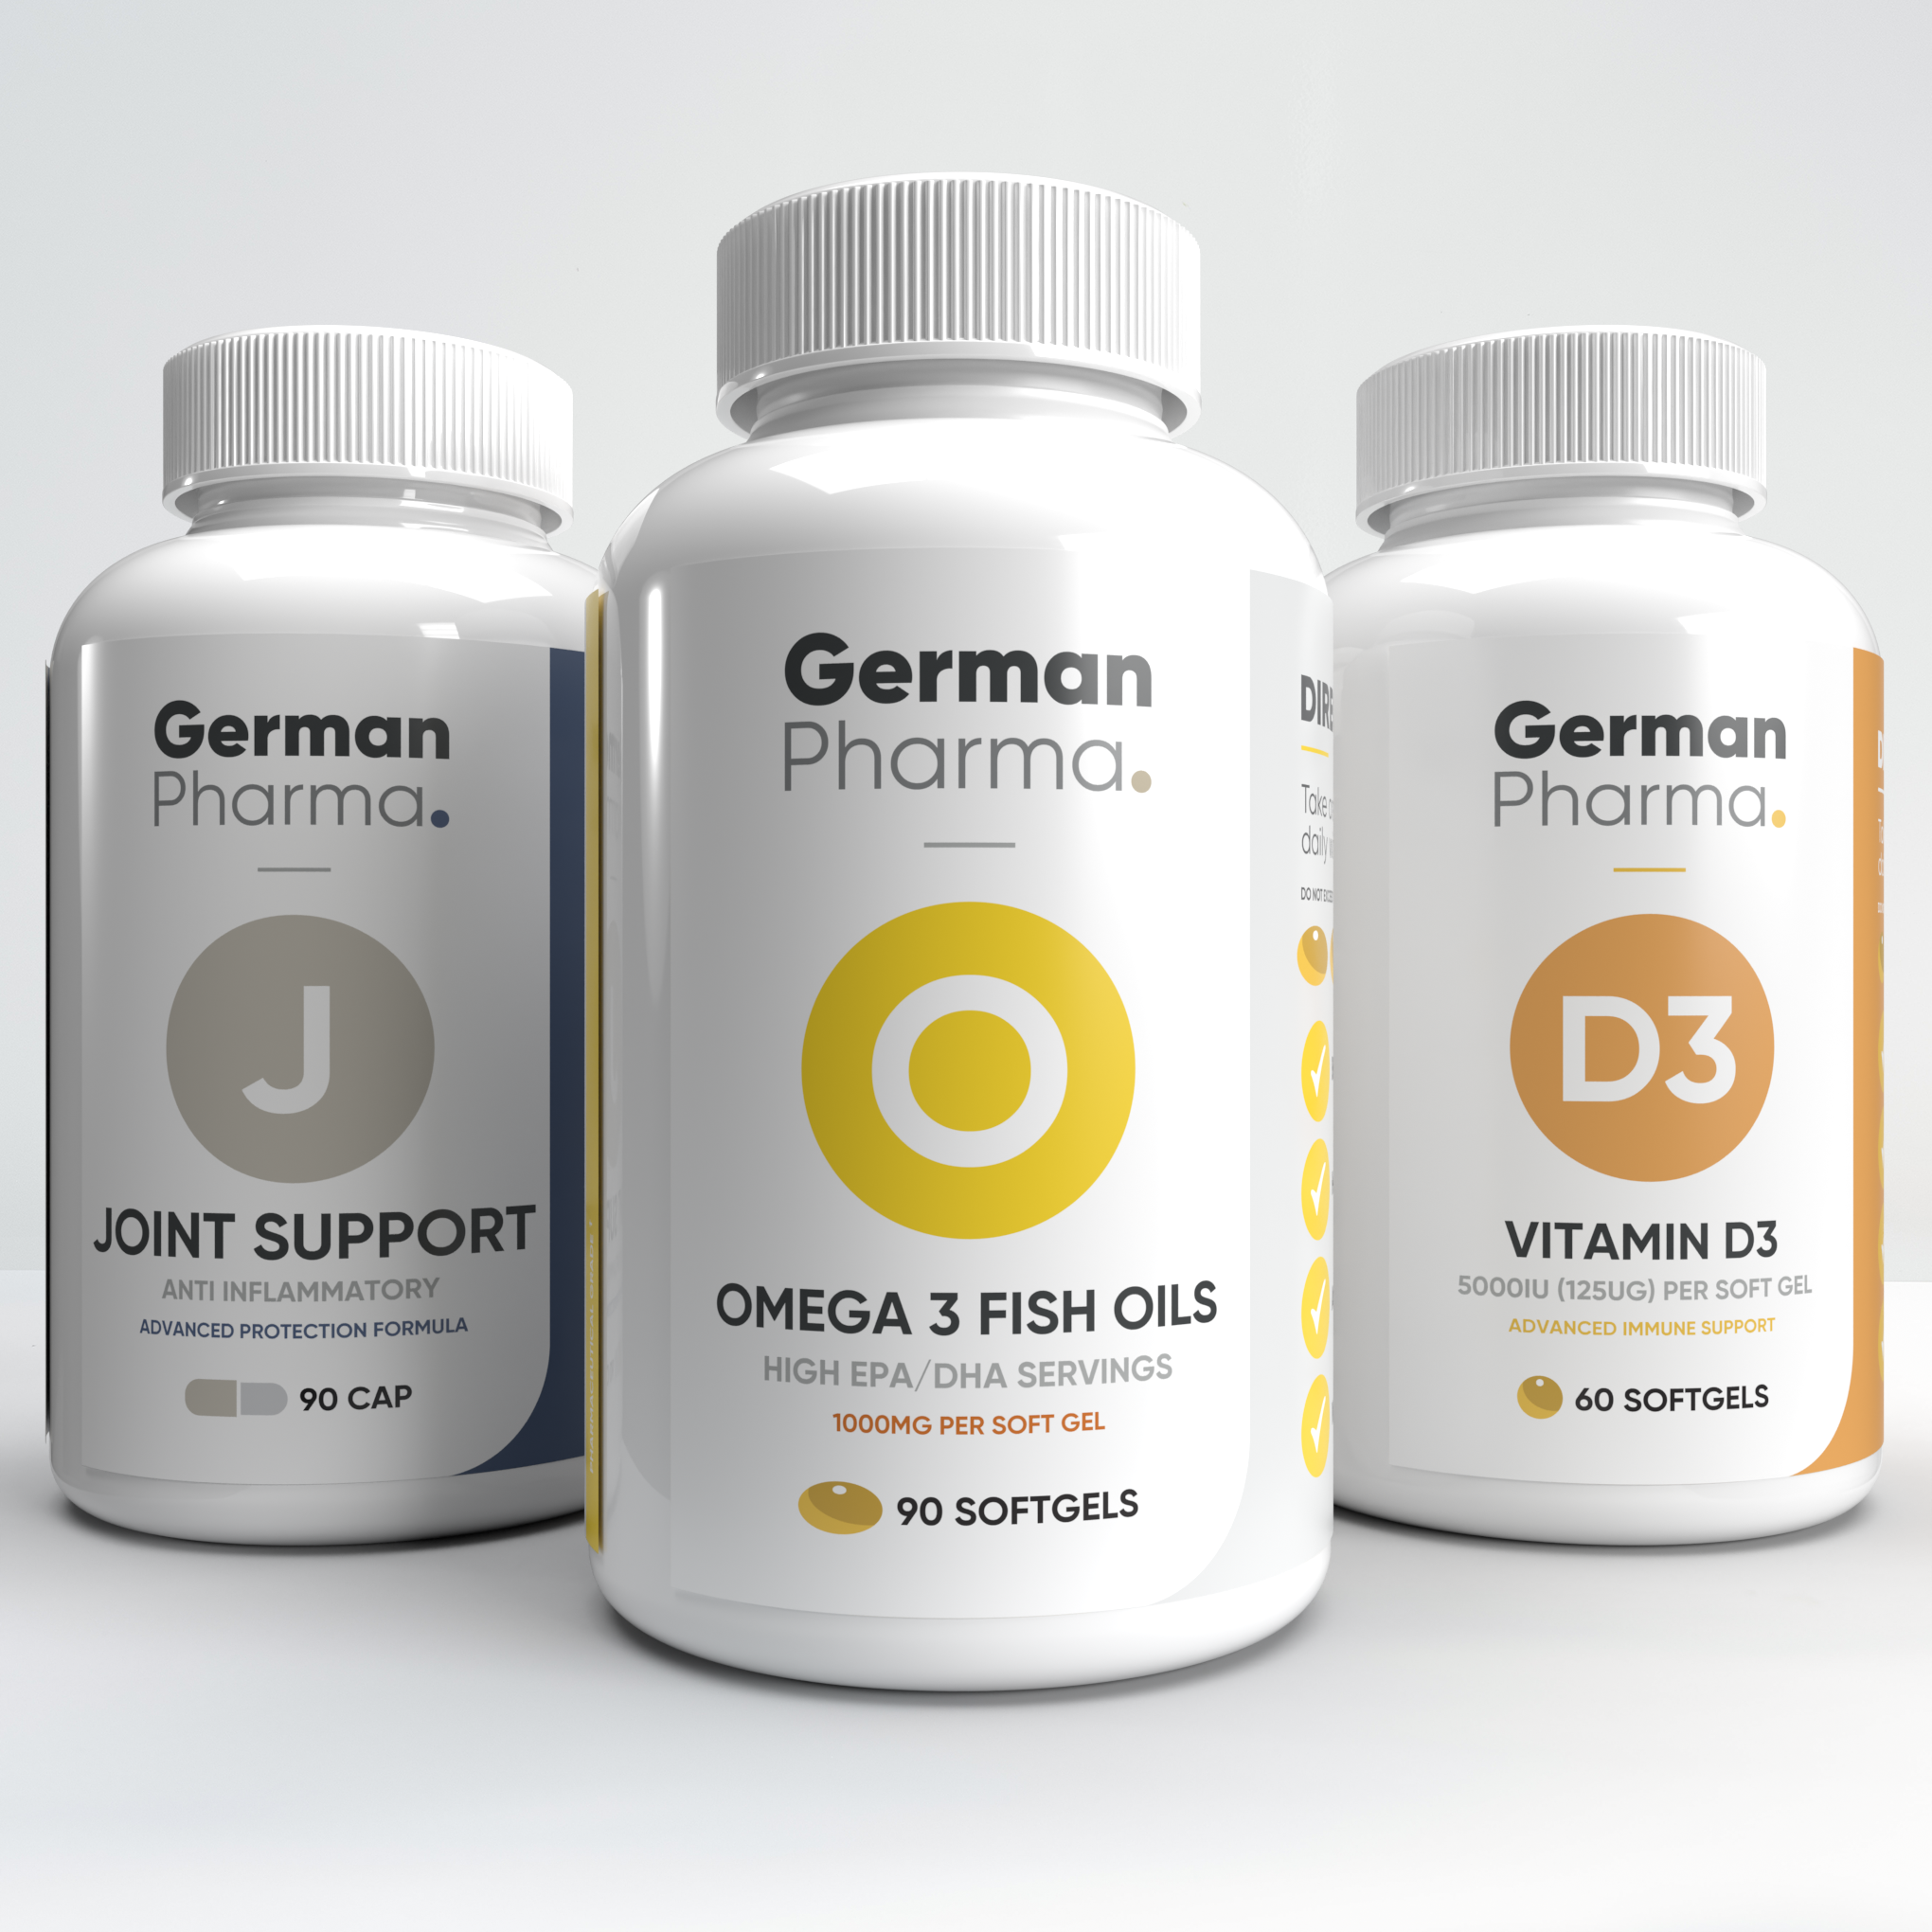 Omega 3 / Vitamin D3 / Joint Support